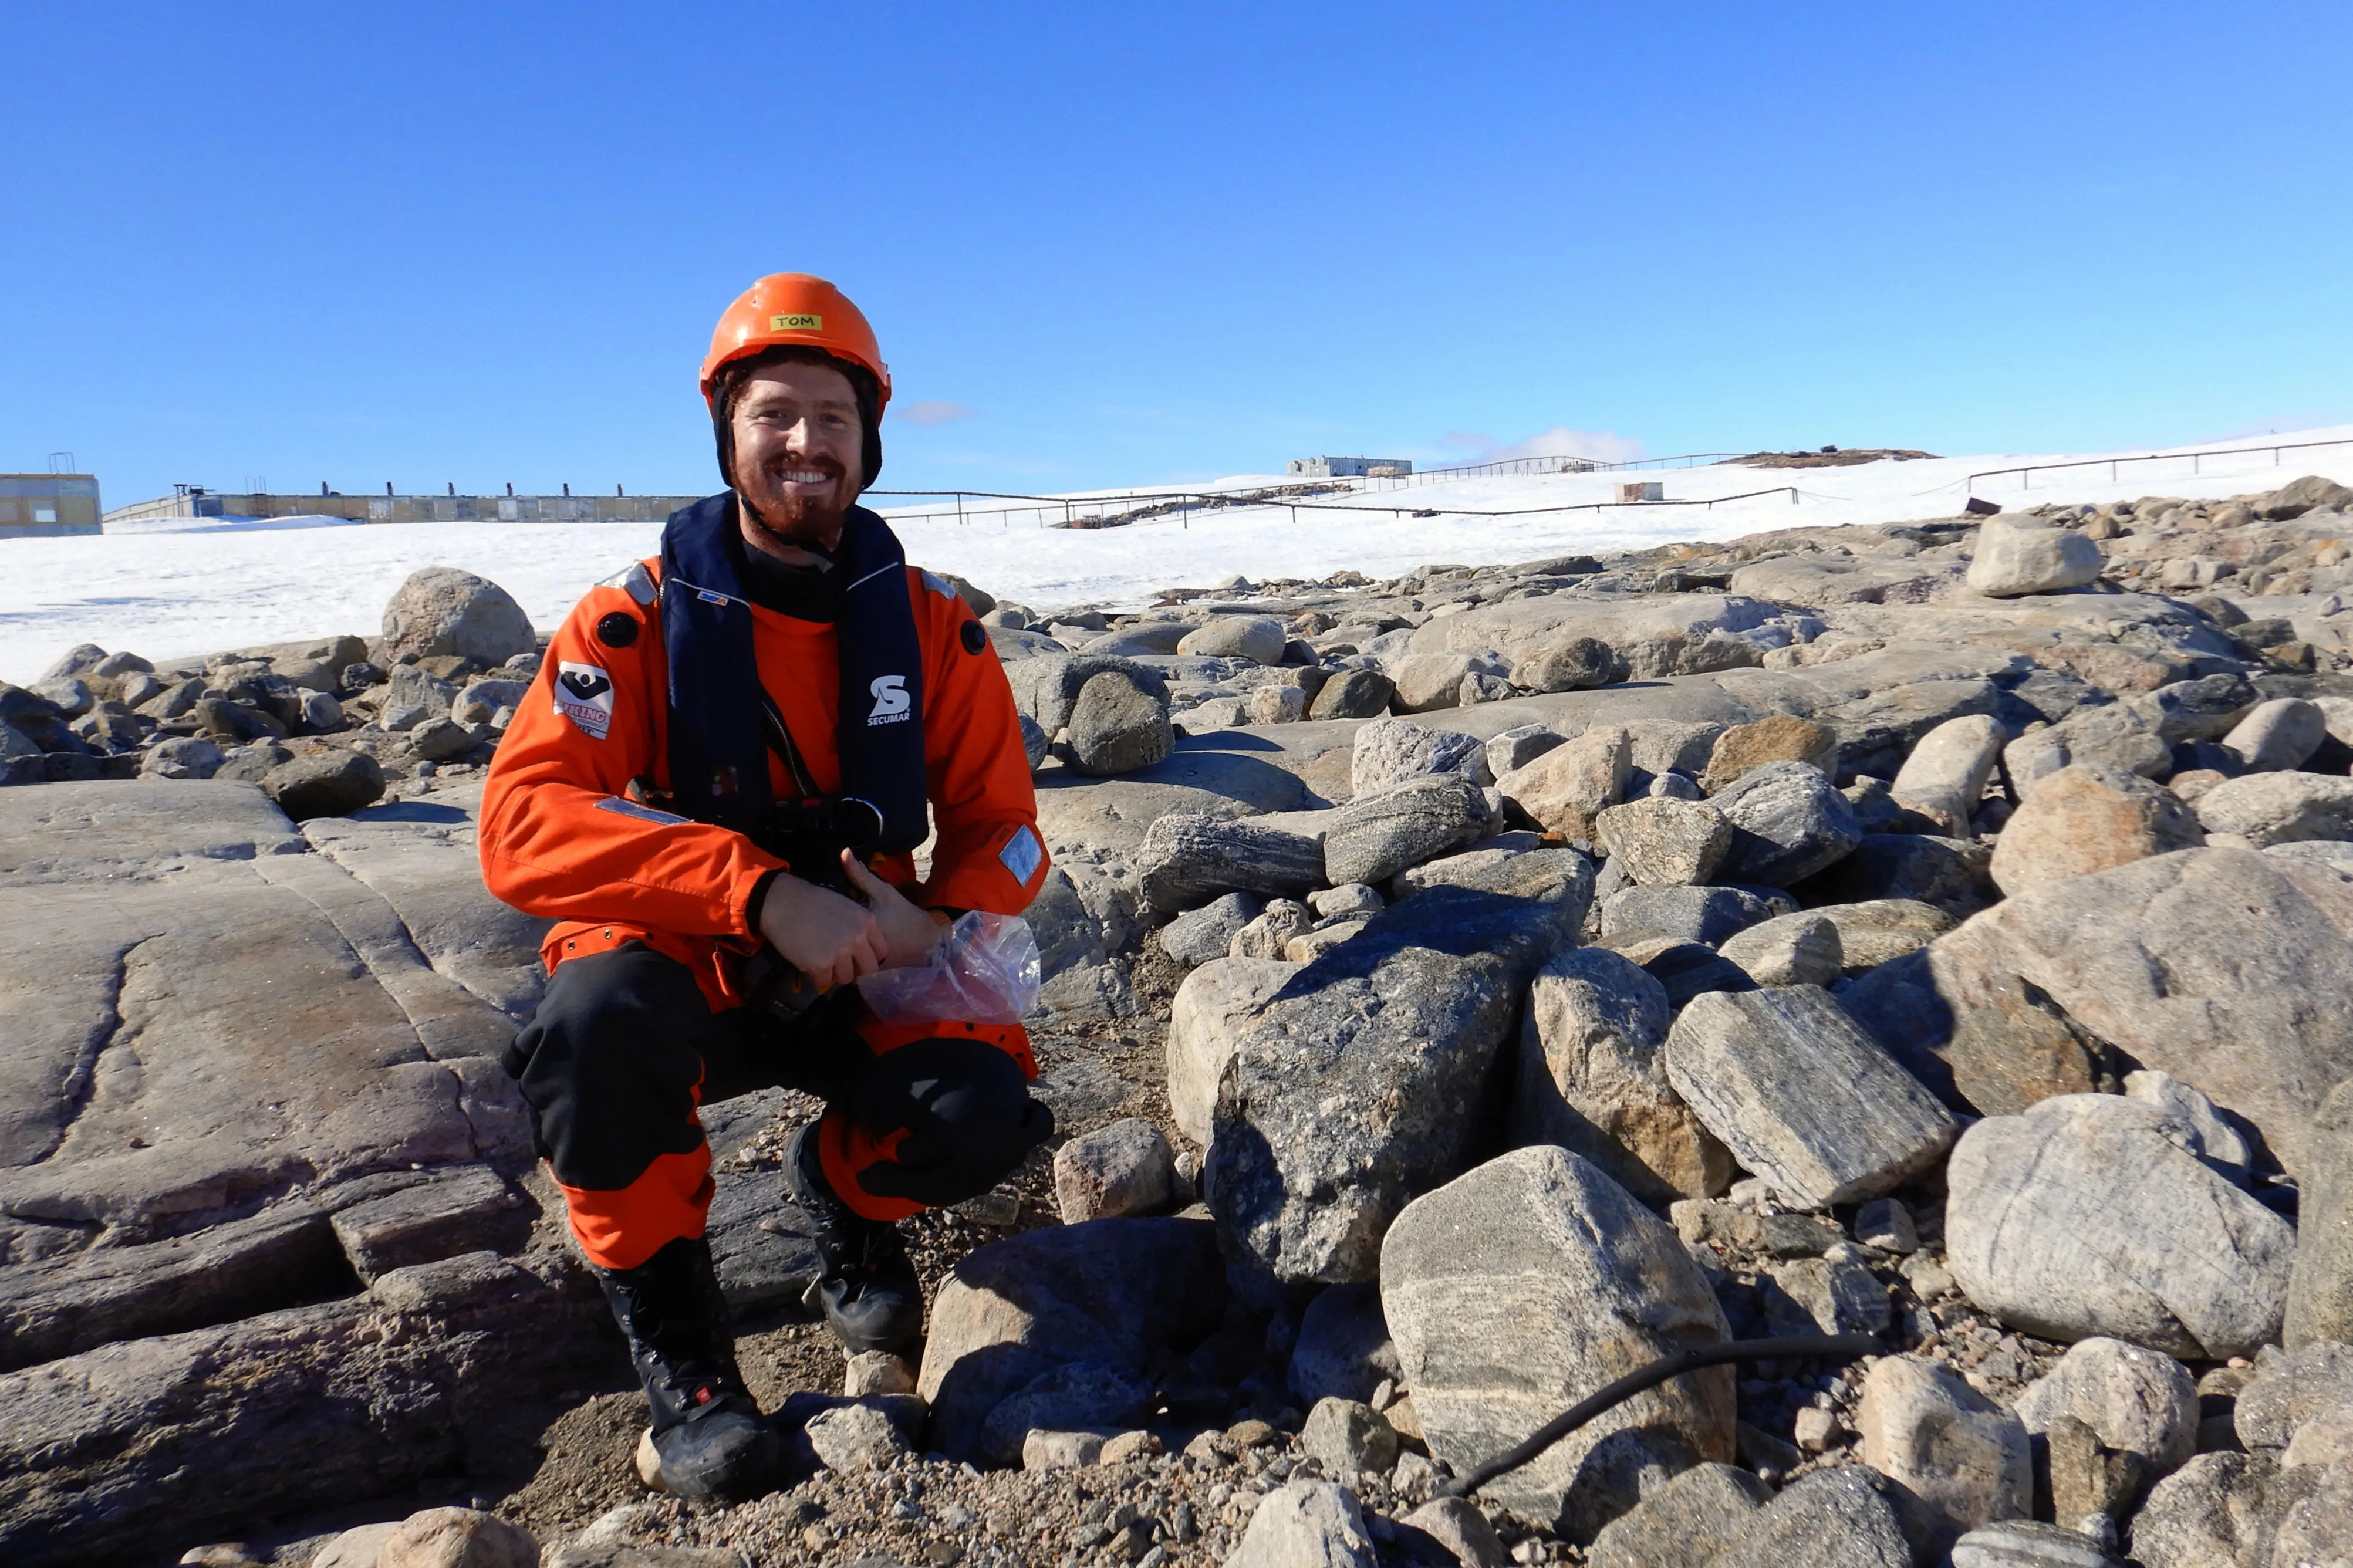 A man in a bright orange immersion suit squatting in a field of football-sized grey rocks.